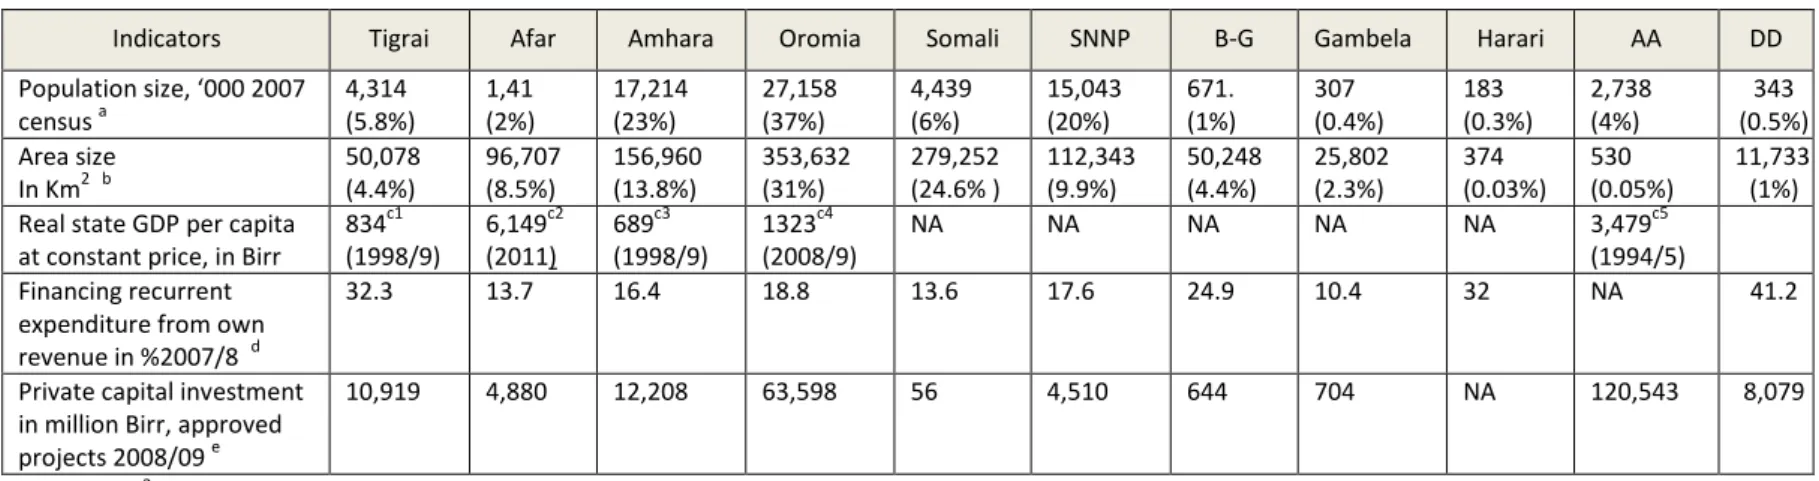 Table 3.3.Some Indicators of Asymmetries among States in Ethiopia 